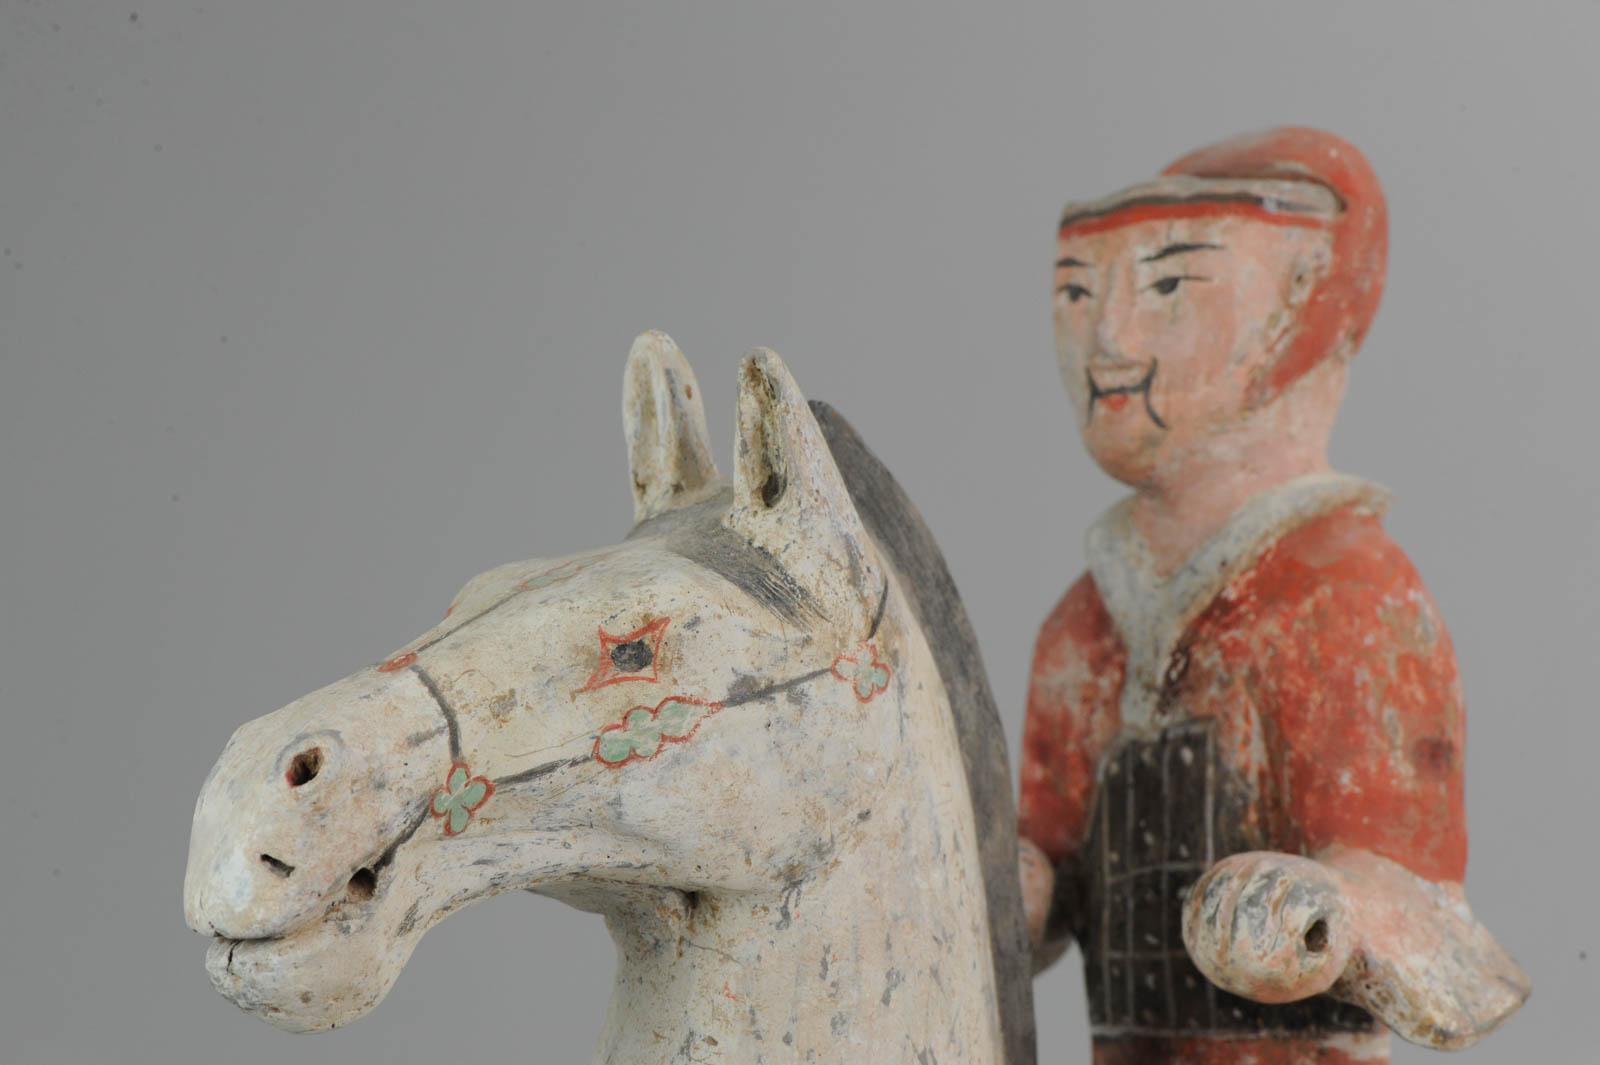 Antique Chinese Stoneware Han Dynasty Horse Man 202 BC-220 AD China Antique For Sale 6